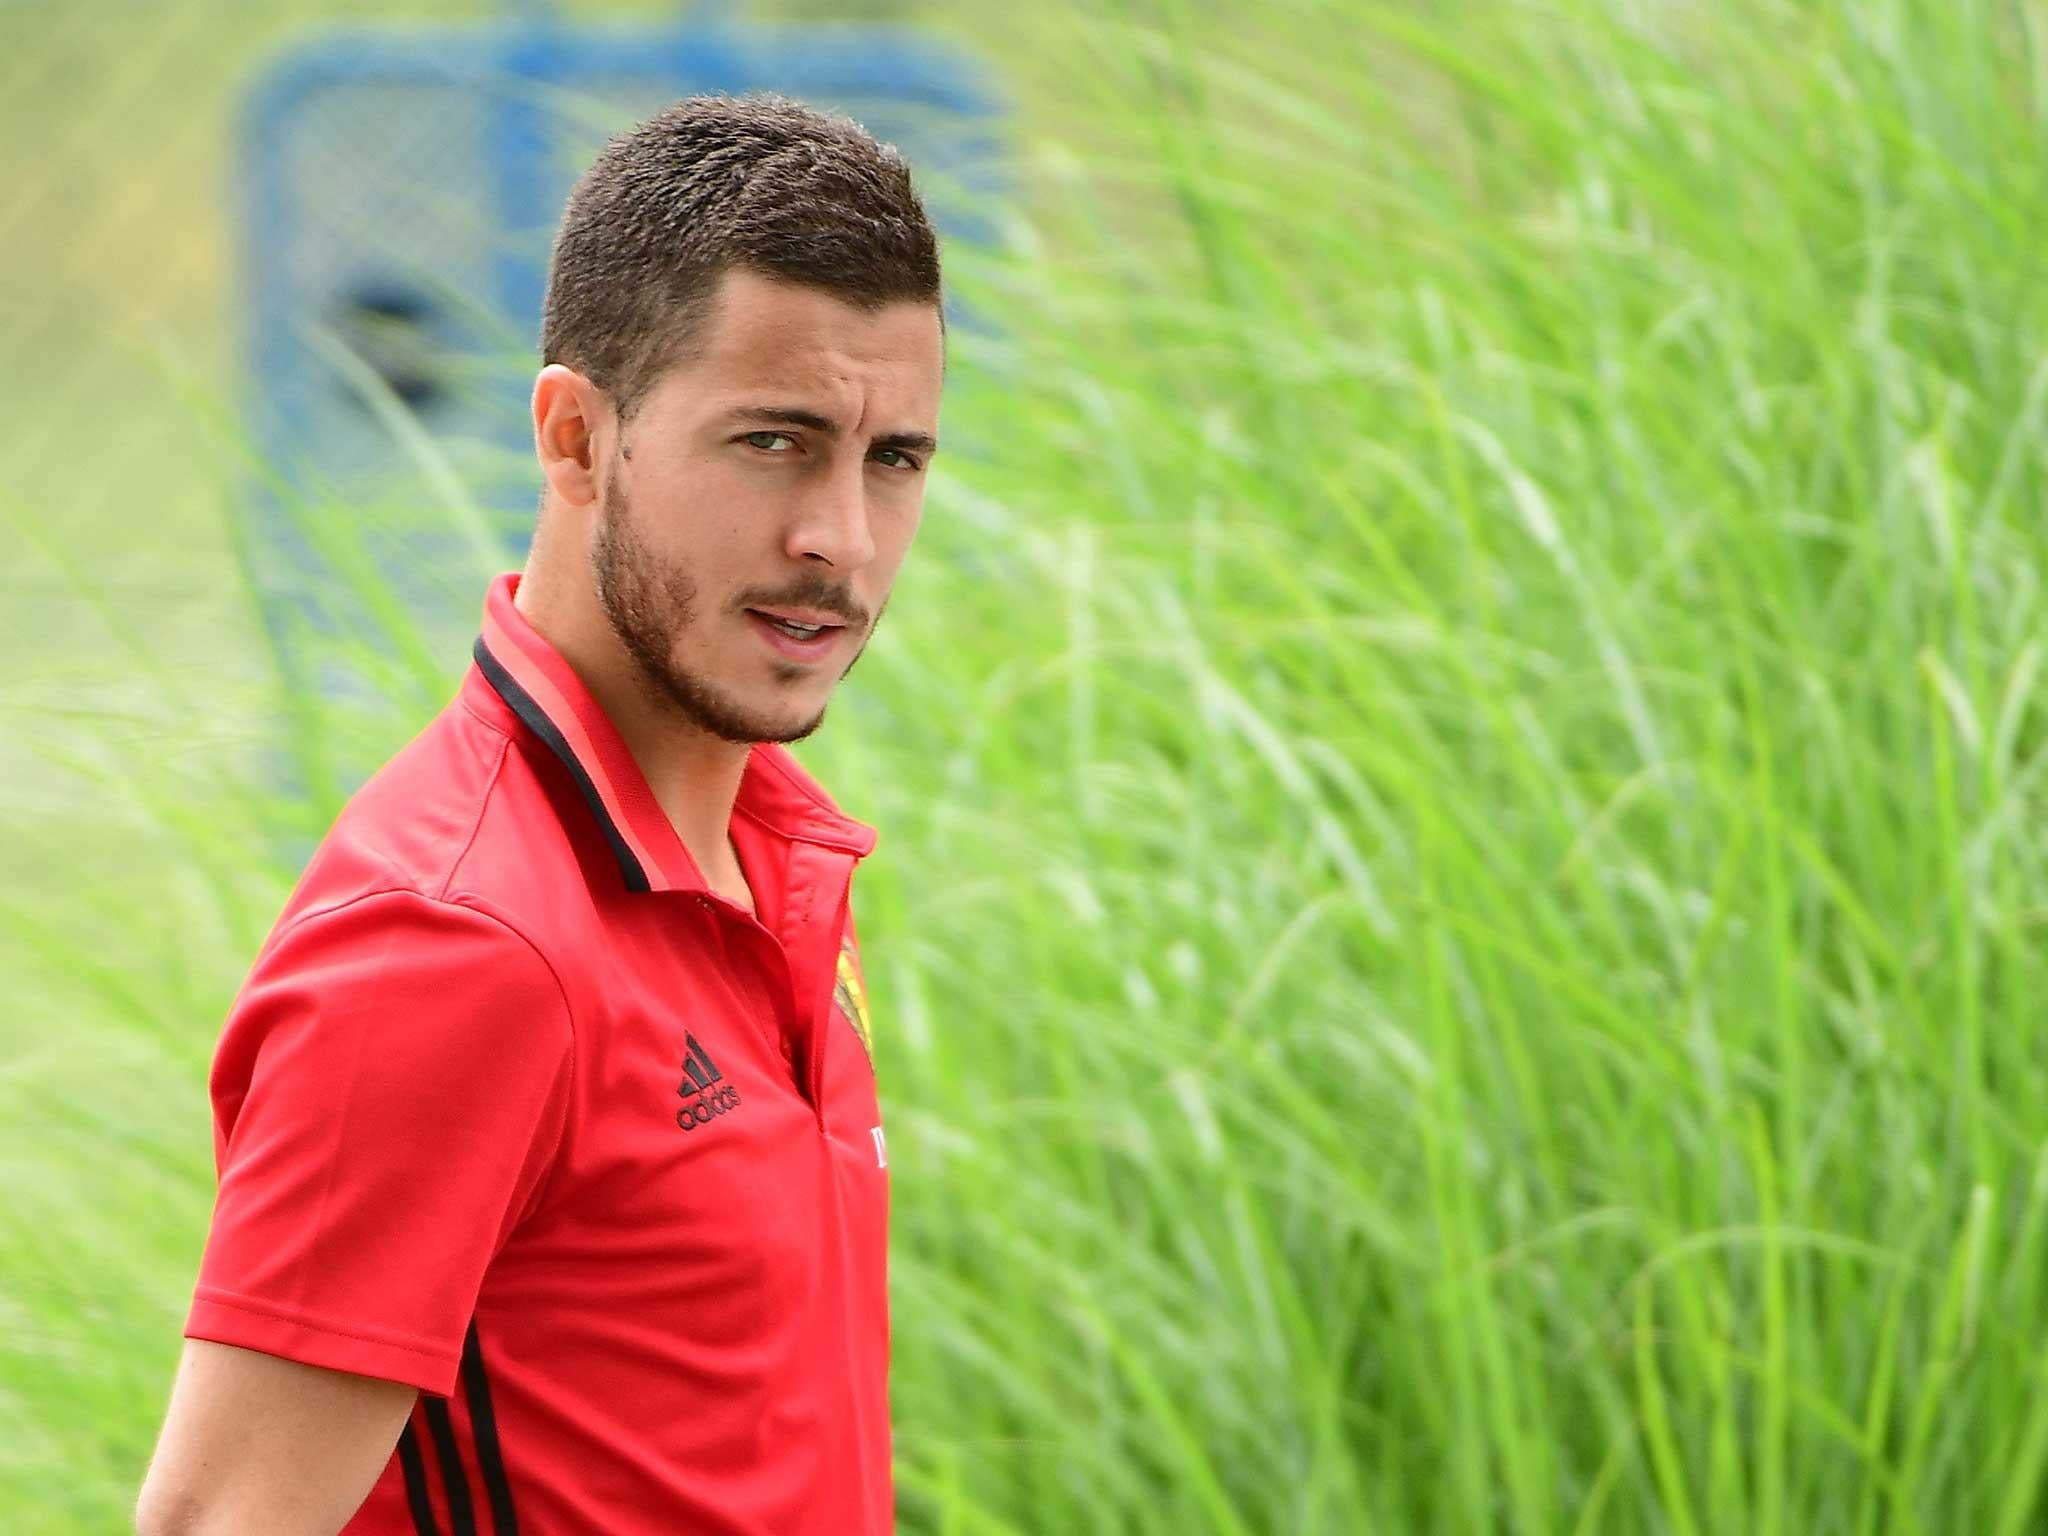 Eden Hazard is expected to continue his late bloom of form last season with Chelsea